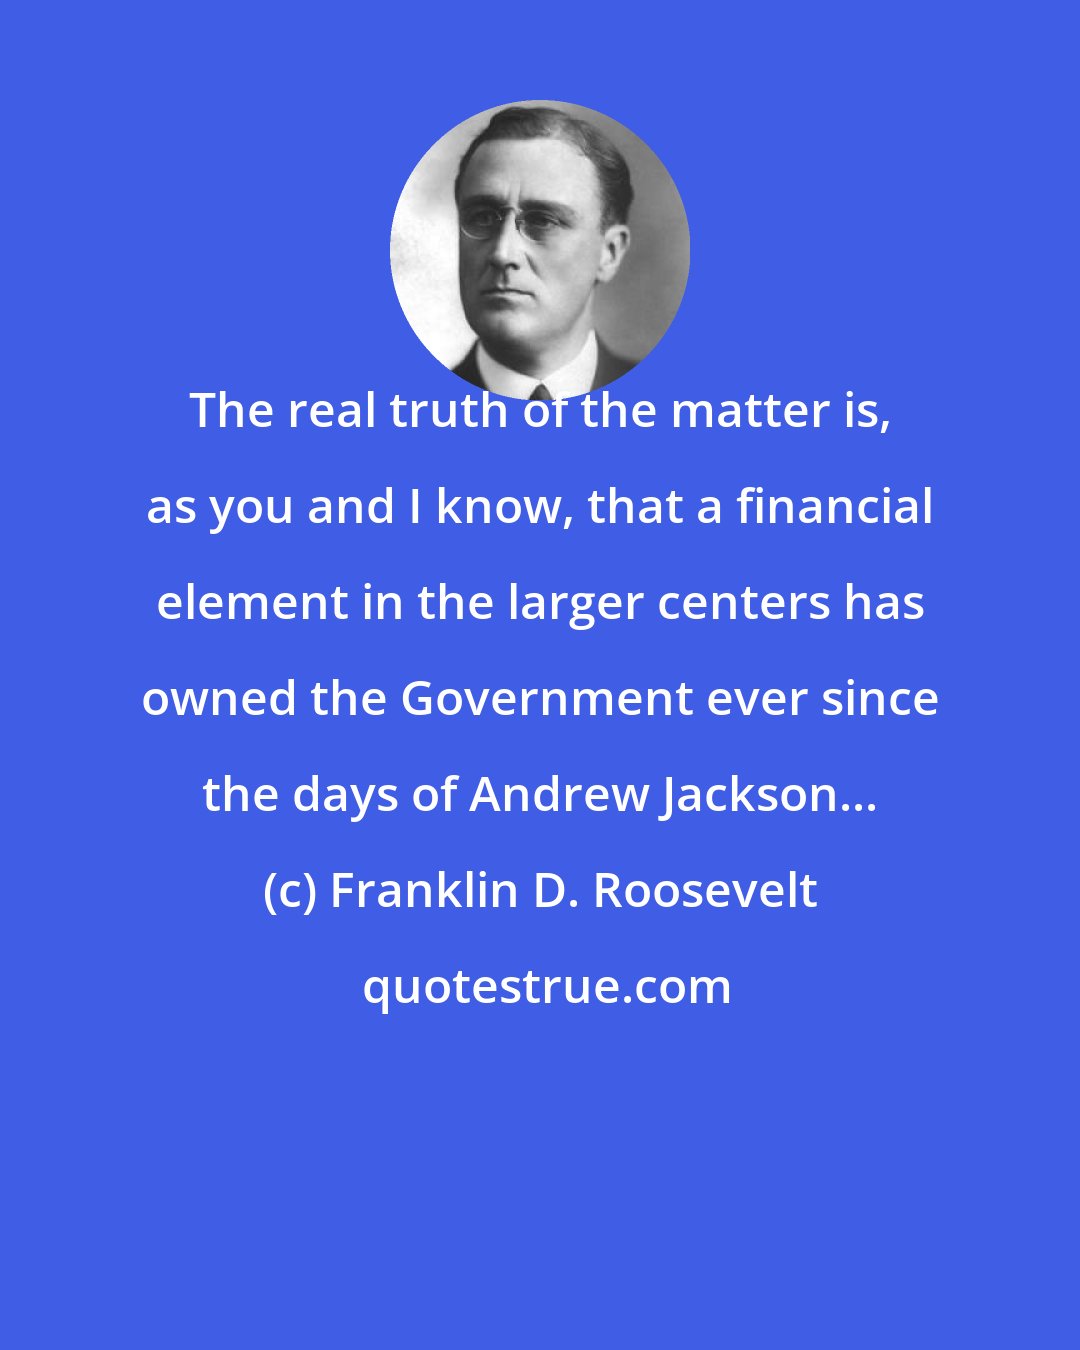 Franklin D. Roosevelt: The real truth of the matter is, as you and I know, that a financial element in the larger centers has owned the Government ever since the days of Andrew Jackson...